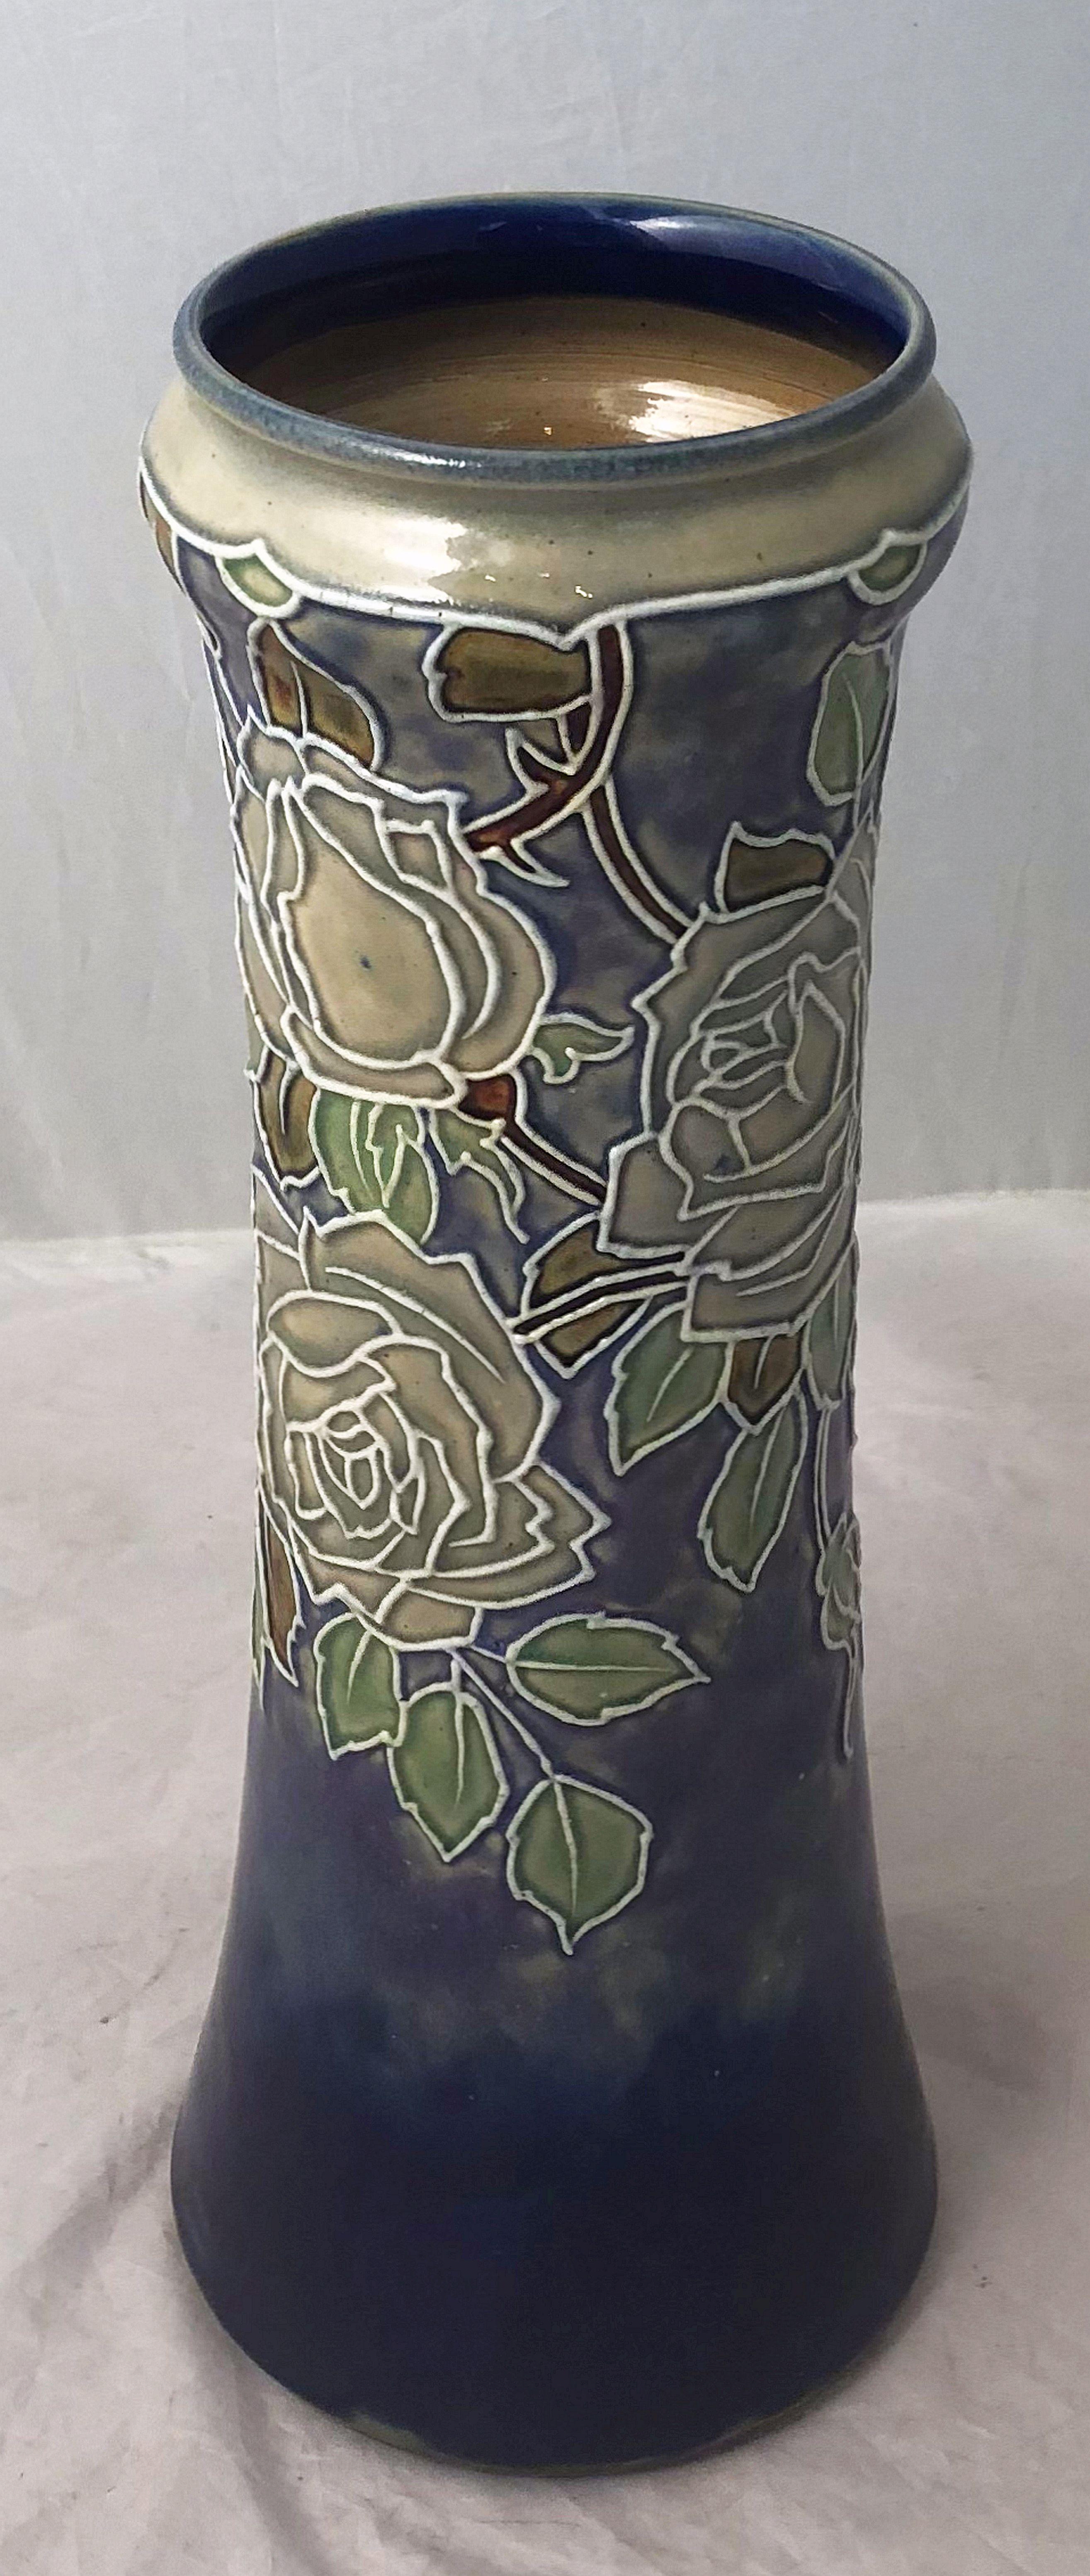 Earthenware Pair of Royal Doulton Vases from the Arts & Crafts Period, 'Priced as a Pair' For Sale